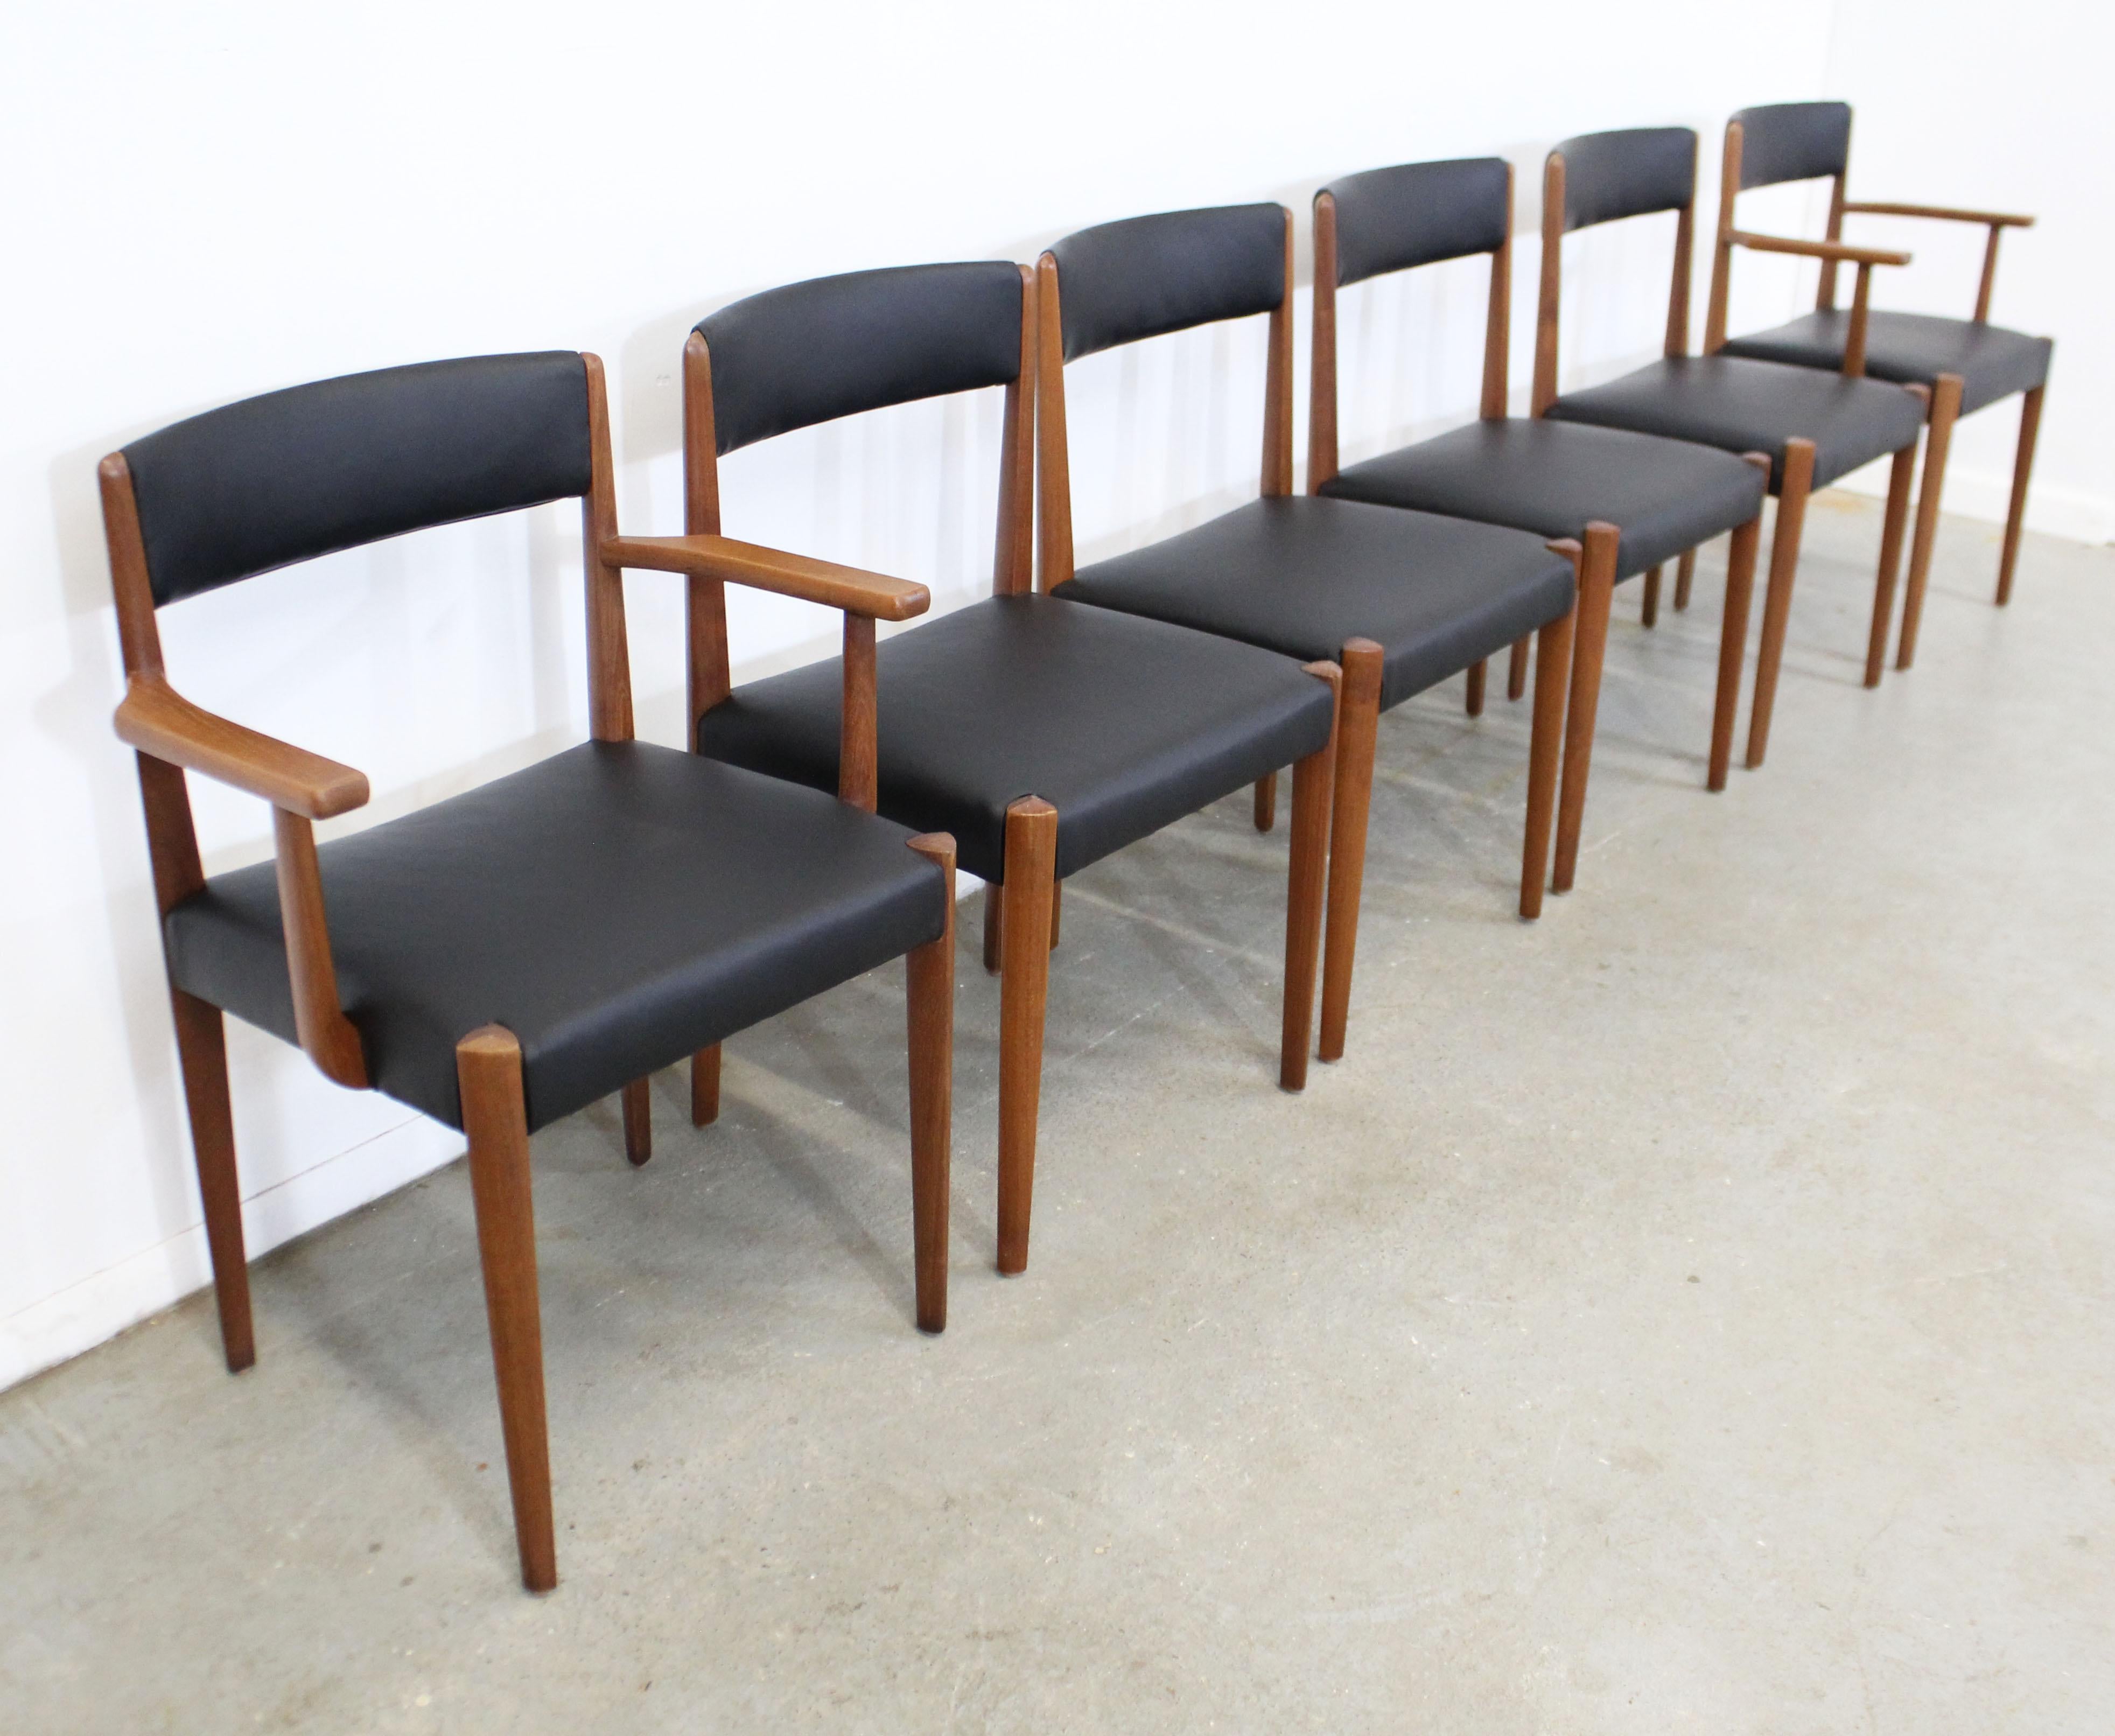 What a find. Offered is a restored vintage set of 6 rare, sleek Danish modern dining chairs. These chairs are made of teak, have been refinished and reupholstered in a supple black leather. They are in excellent restored condition, structurally